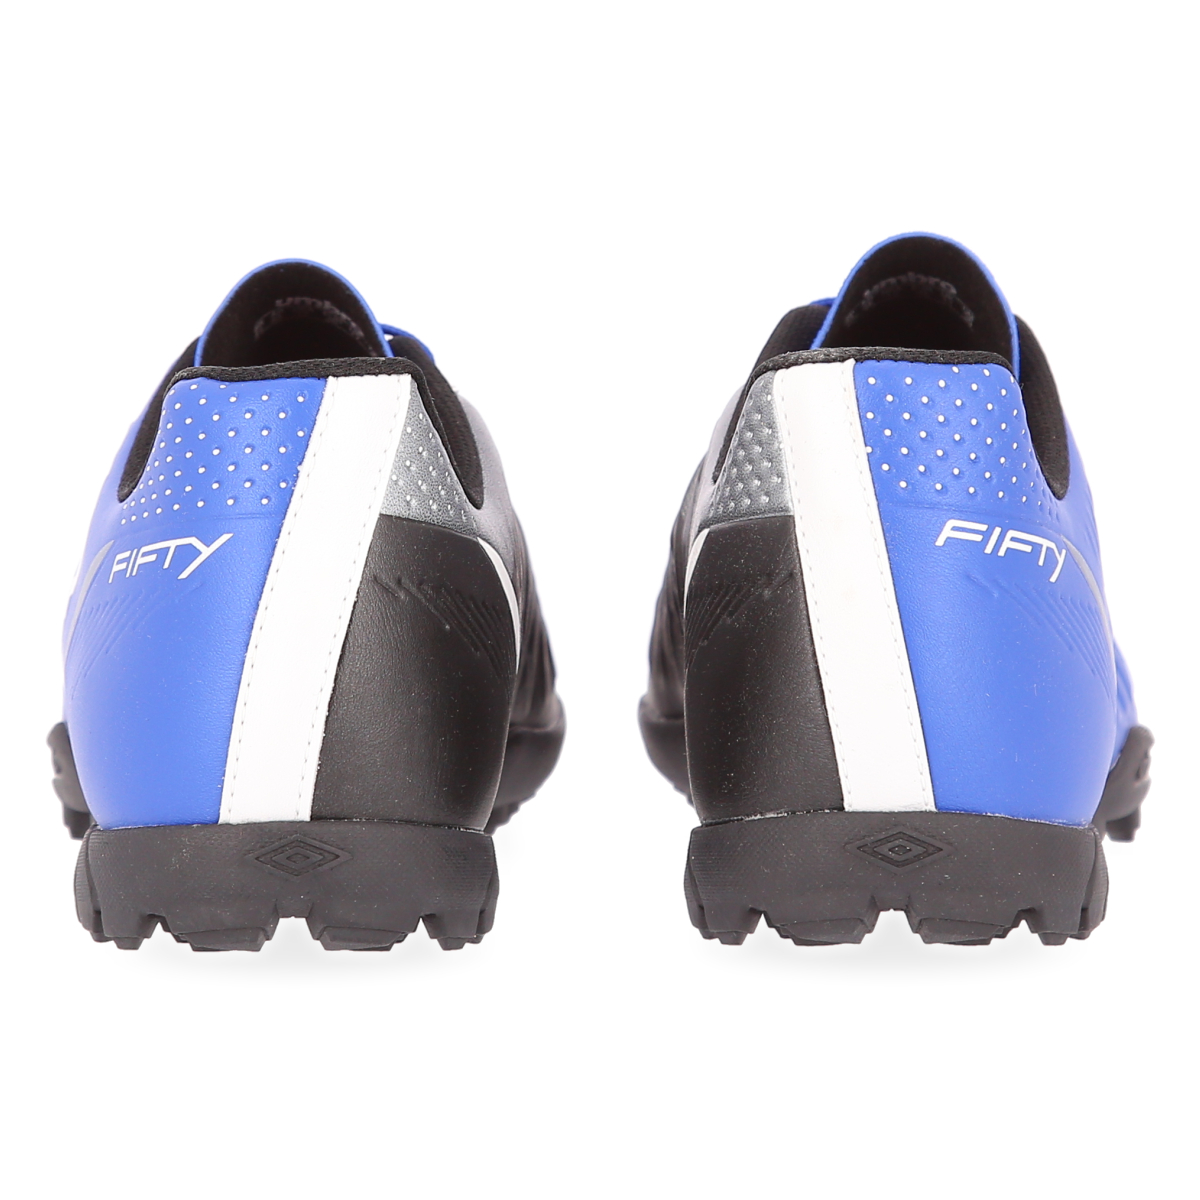 Botines Umbro Fifty Iv TF,  image number null